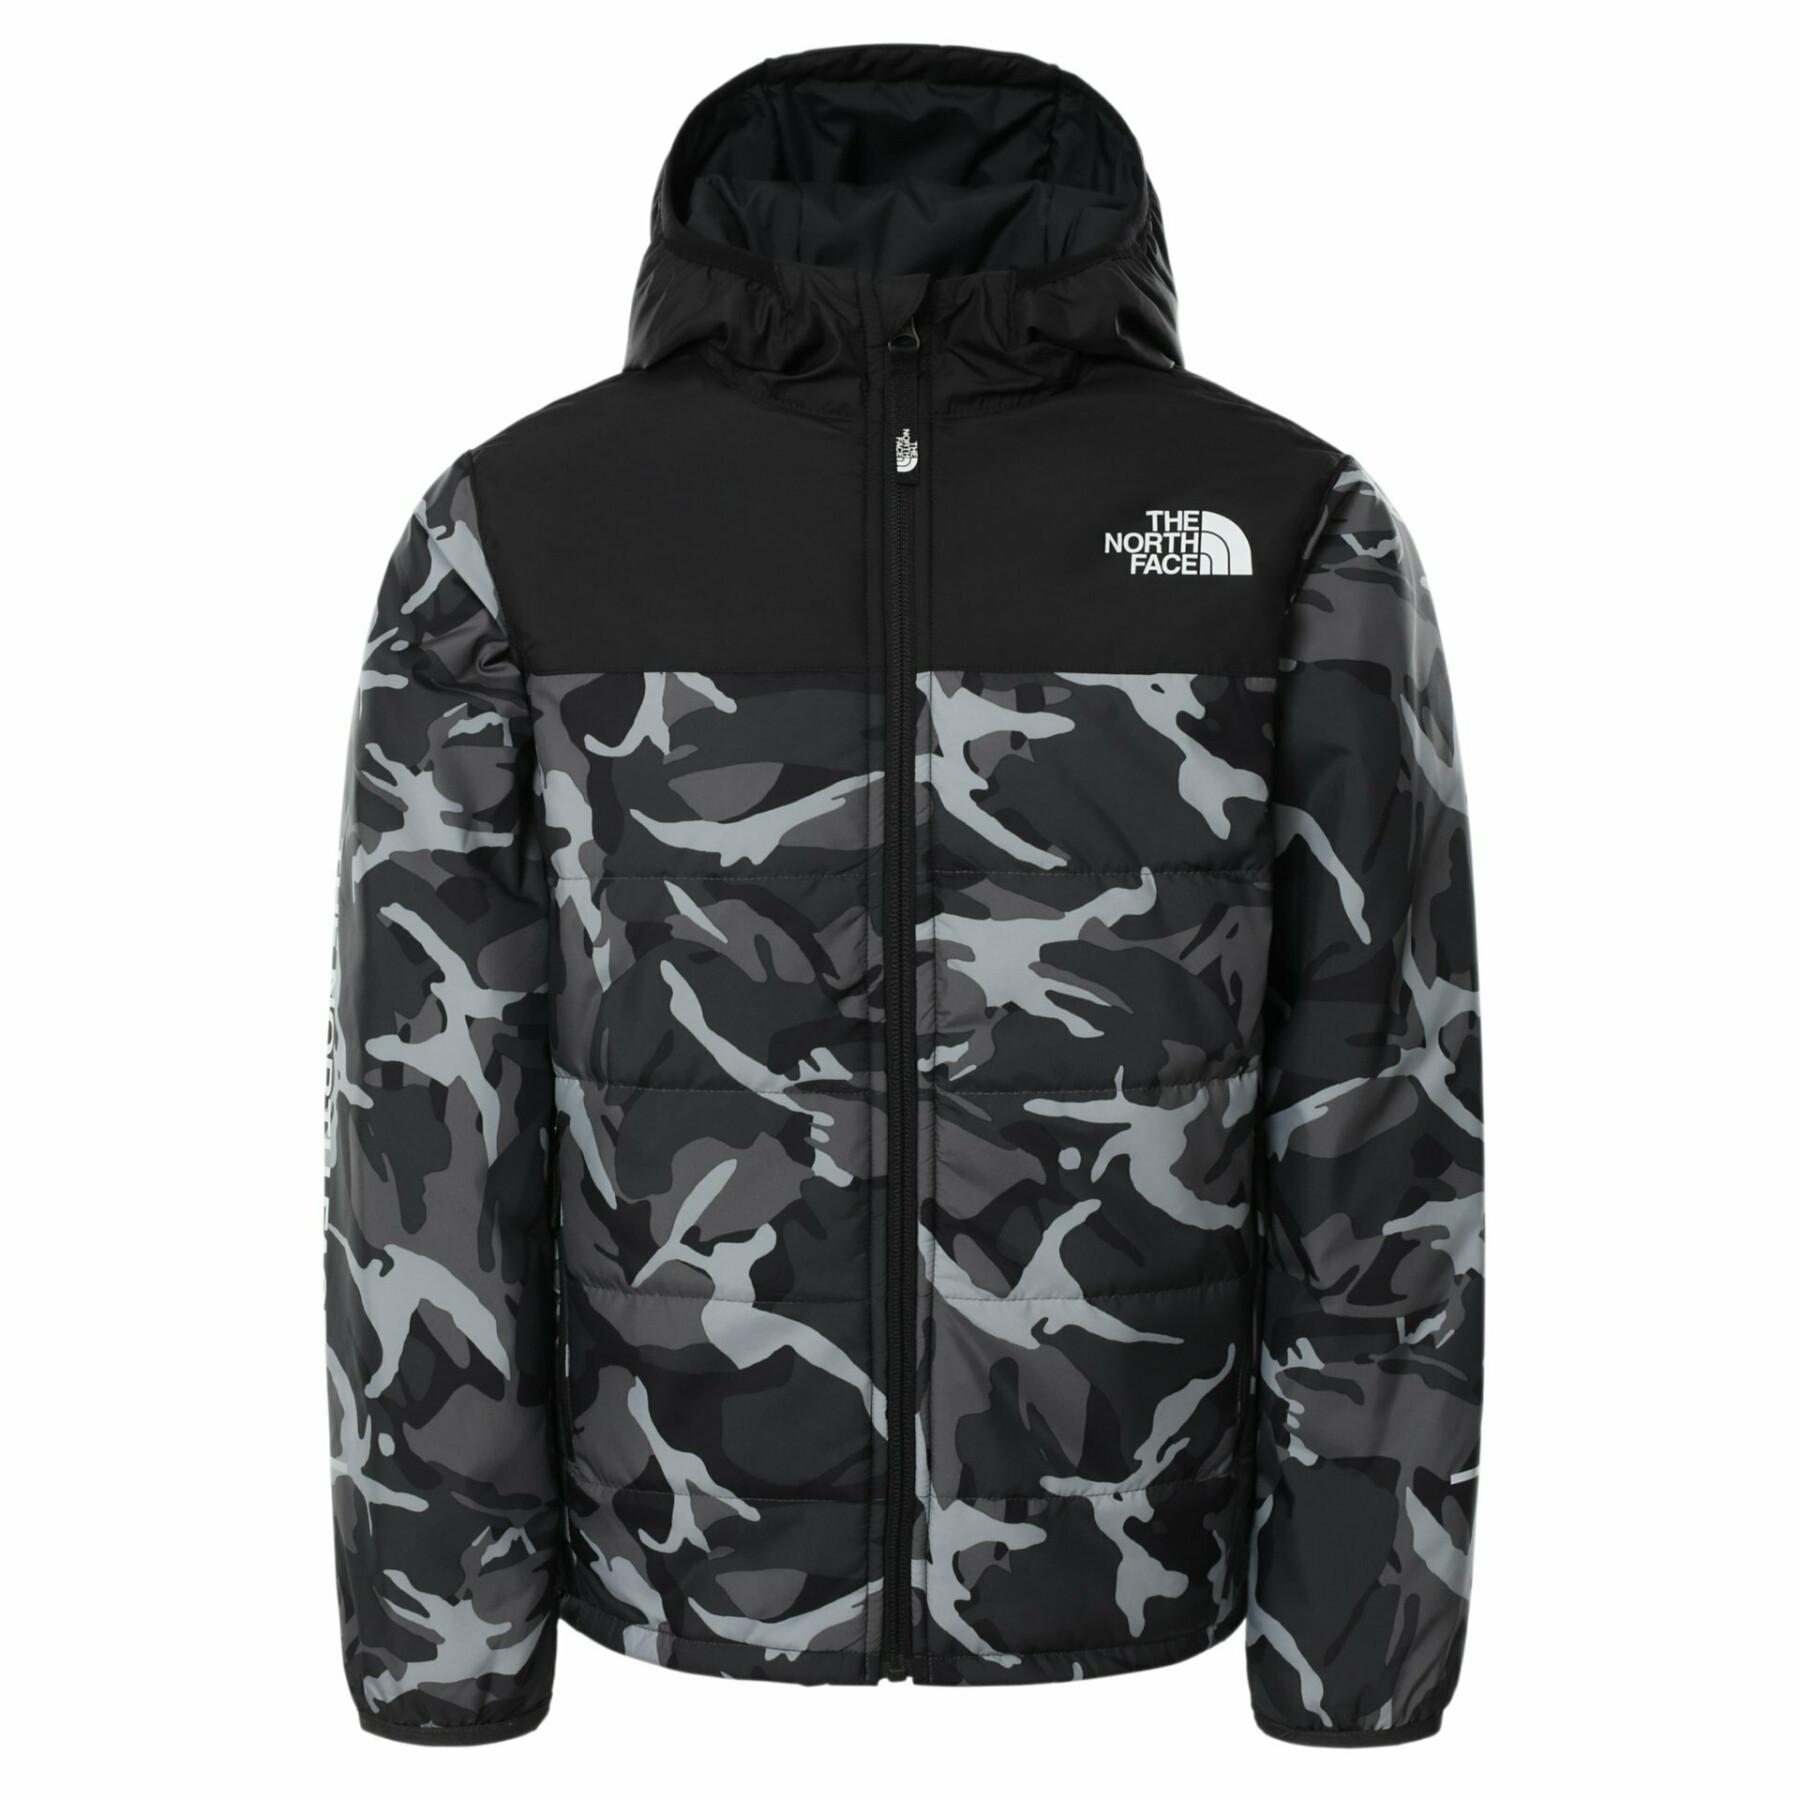 Kurtka chłopięca The North Face Printed Reactor Insulated